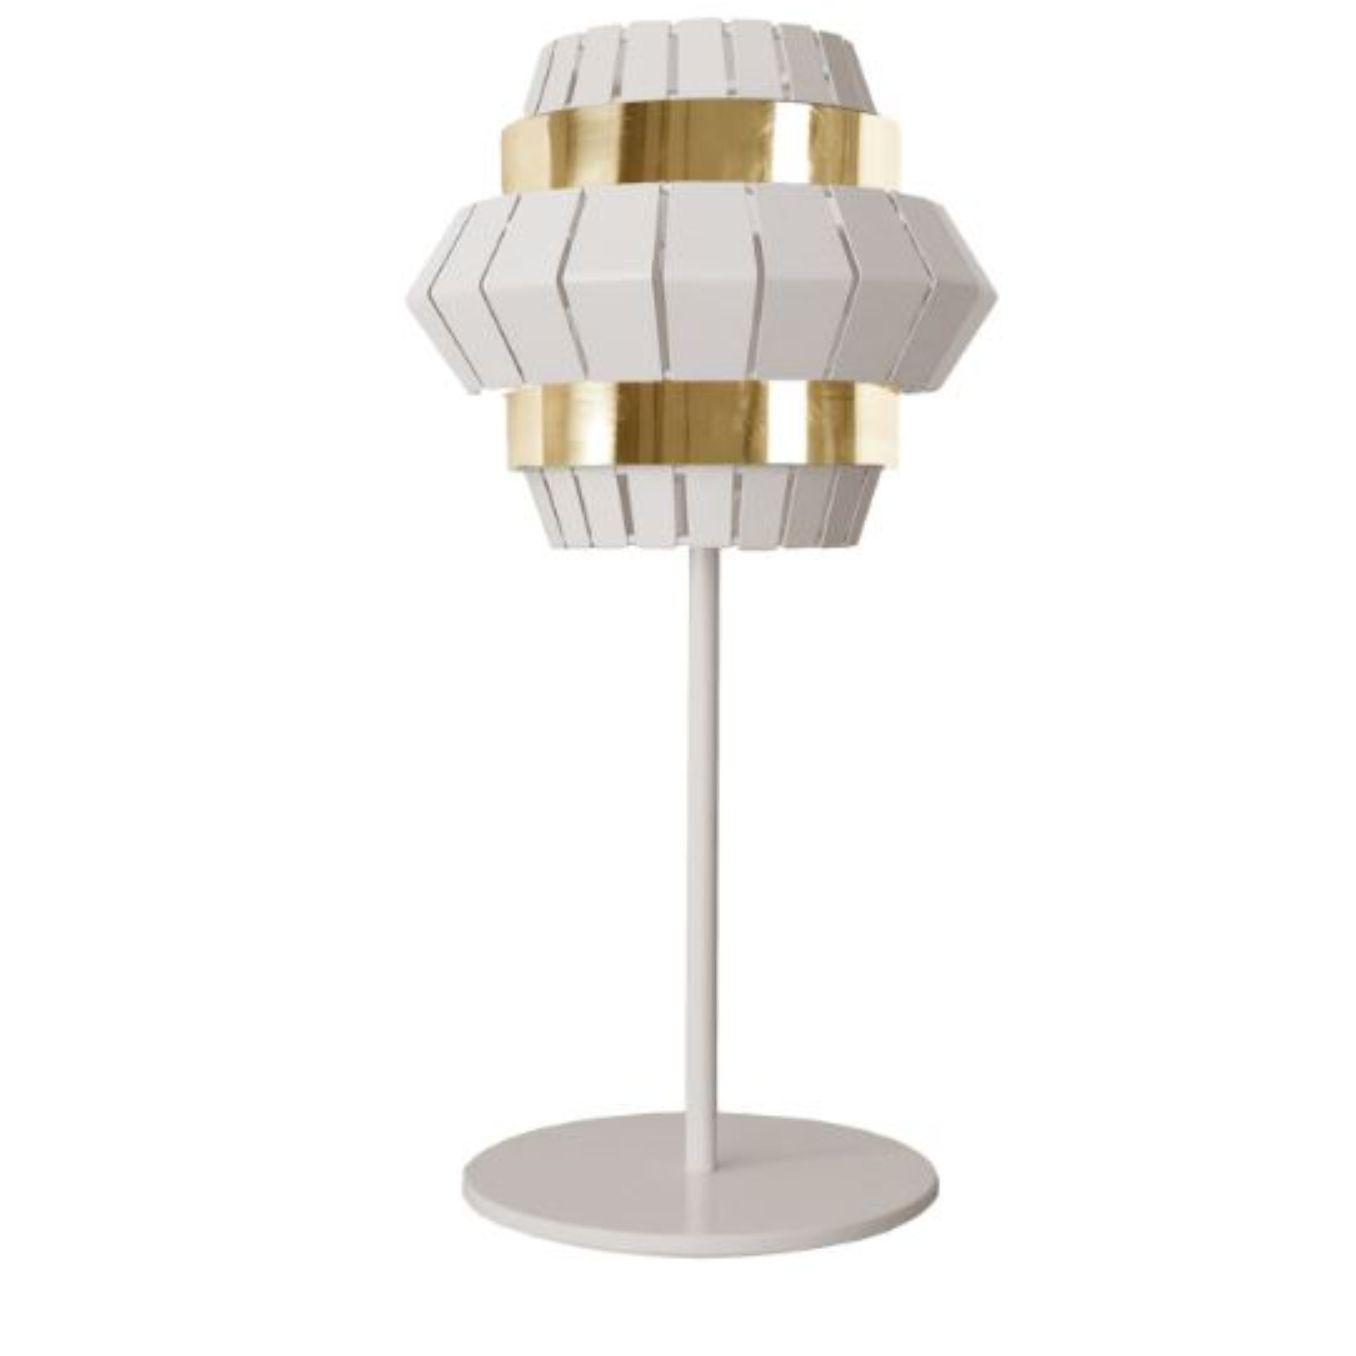 Ivory comb table lamp with brass ring by Dooq
Dimensions: W 25.5 x D 25.5 x H 60 cm
Materials: lacquered metal, polished brass.
Also available in different colors and materials.

Information:
230V/50Hz
E14/1x20W LED
120V/60Hz
E12/1x15W LED
bulb not